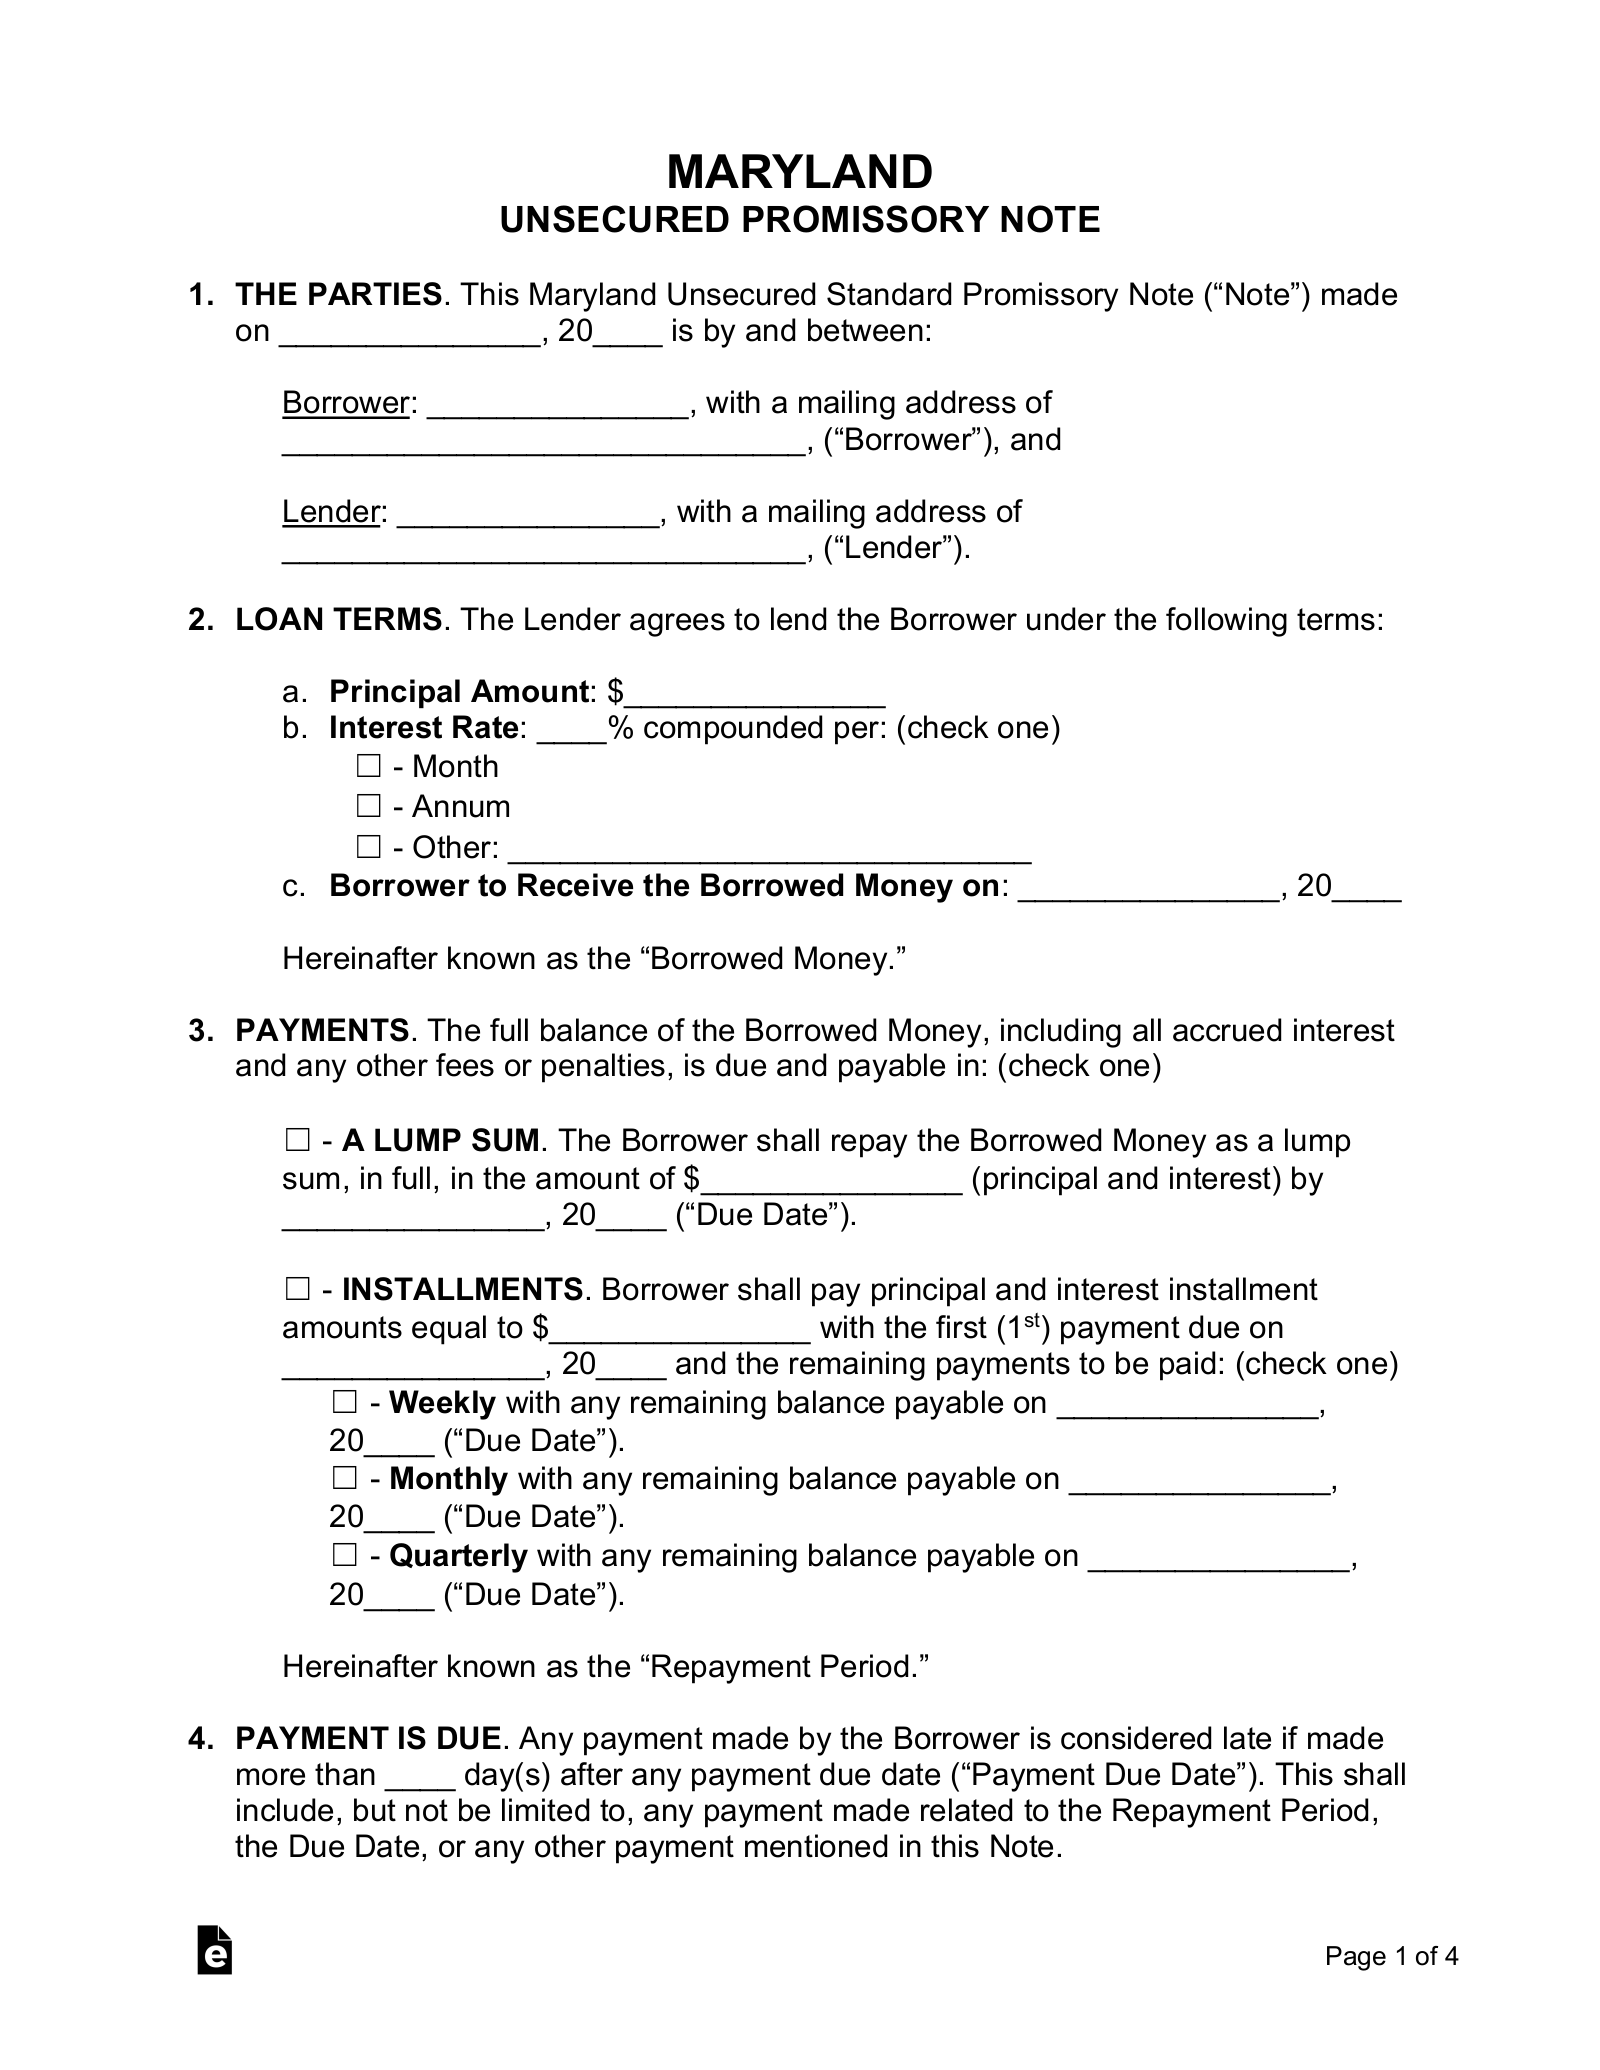 Maryland Unsecured Promissory Note Template